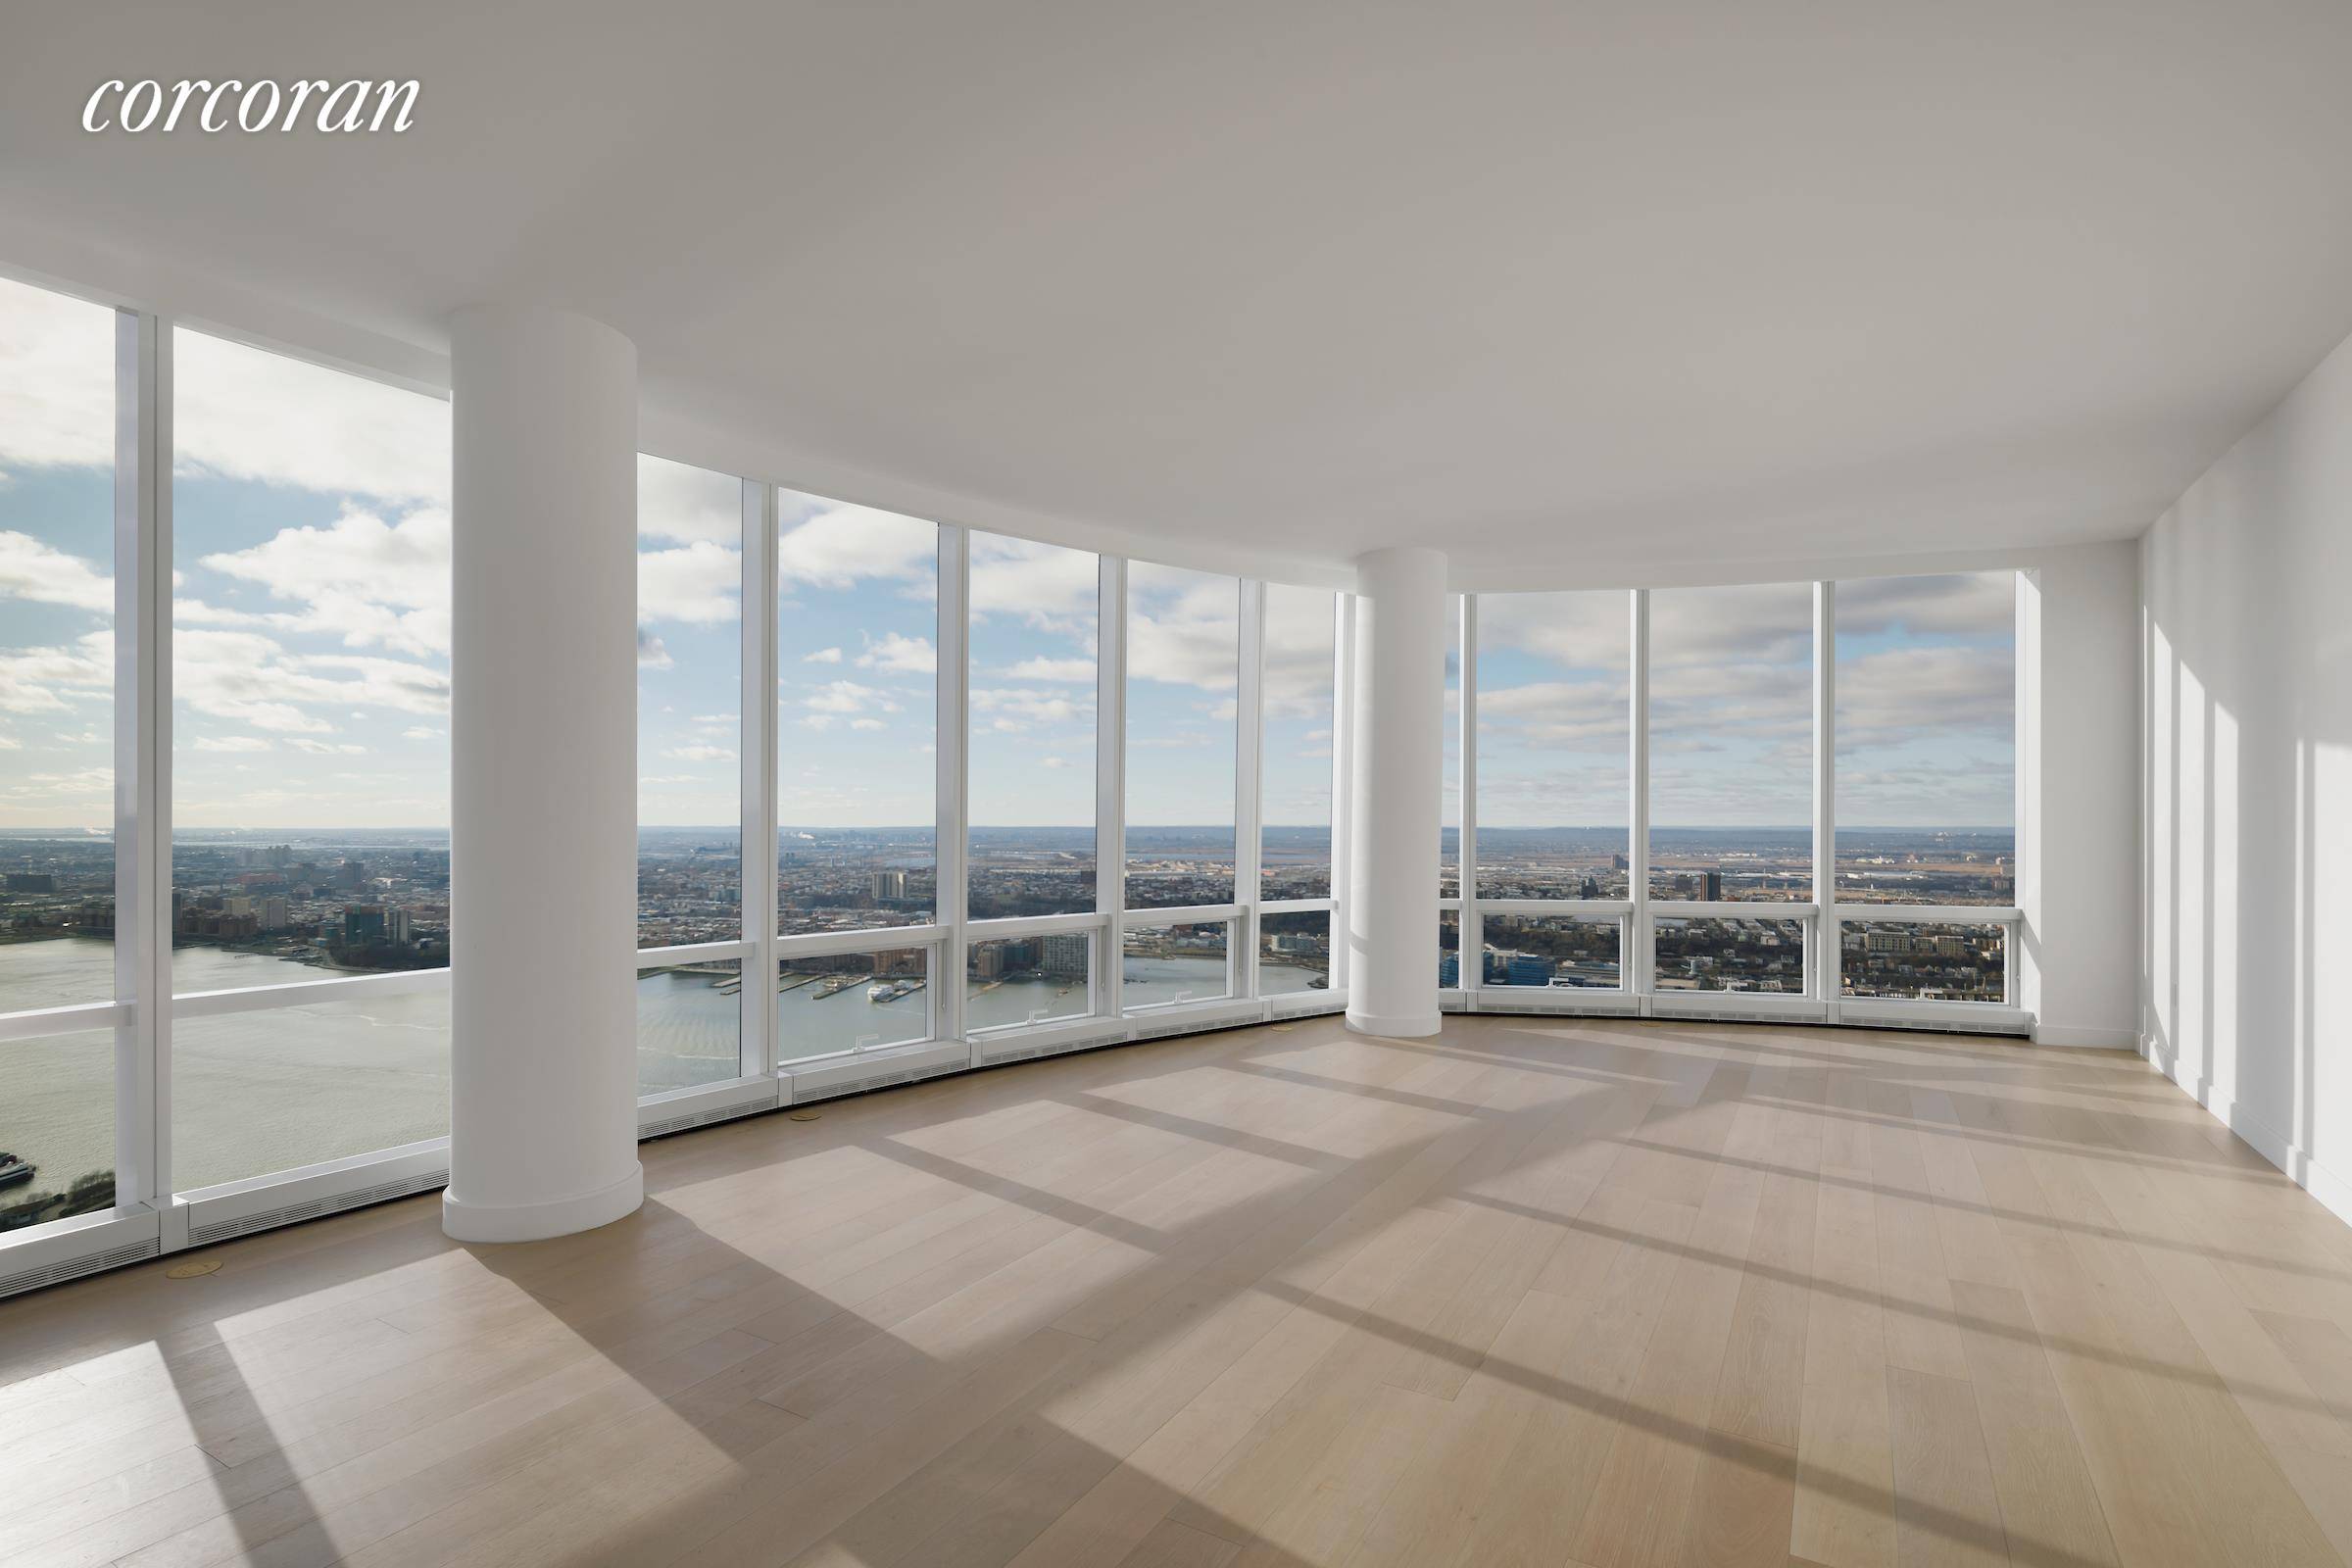 A DISTINGUISHED ADDRESS. Penthouse 83B is a stunning four bedroom residence of 3203 square feet with ceilings up to 10'10, and spectacular sunset views of the Hudson River.